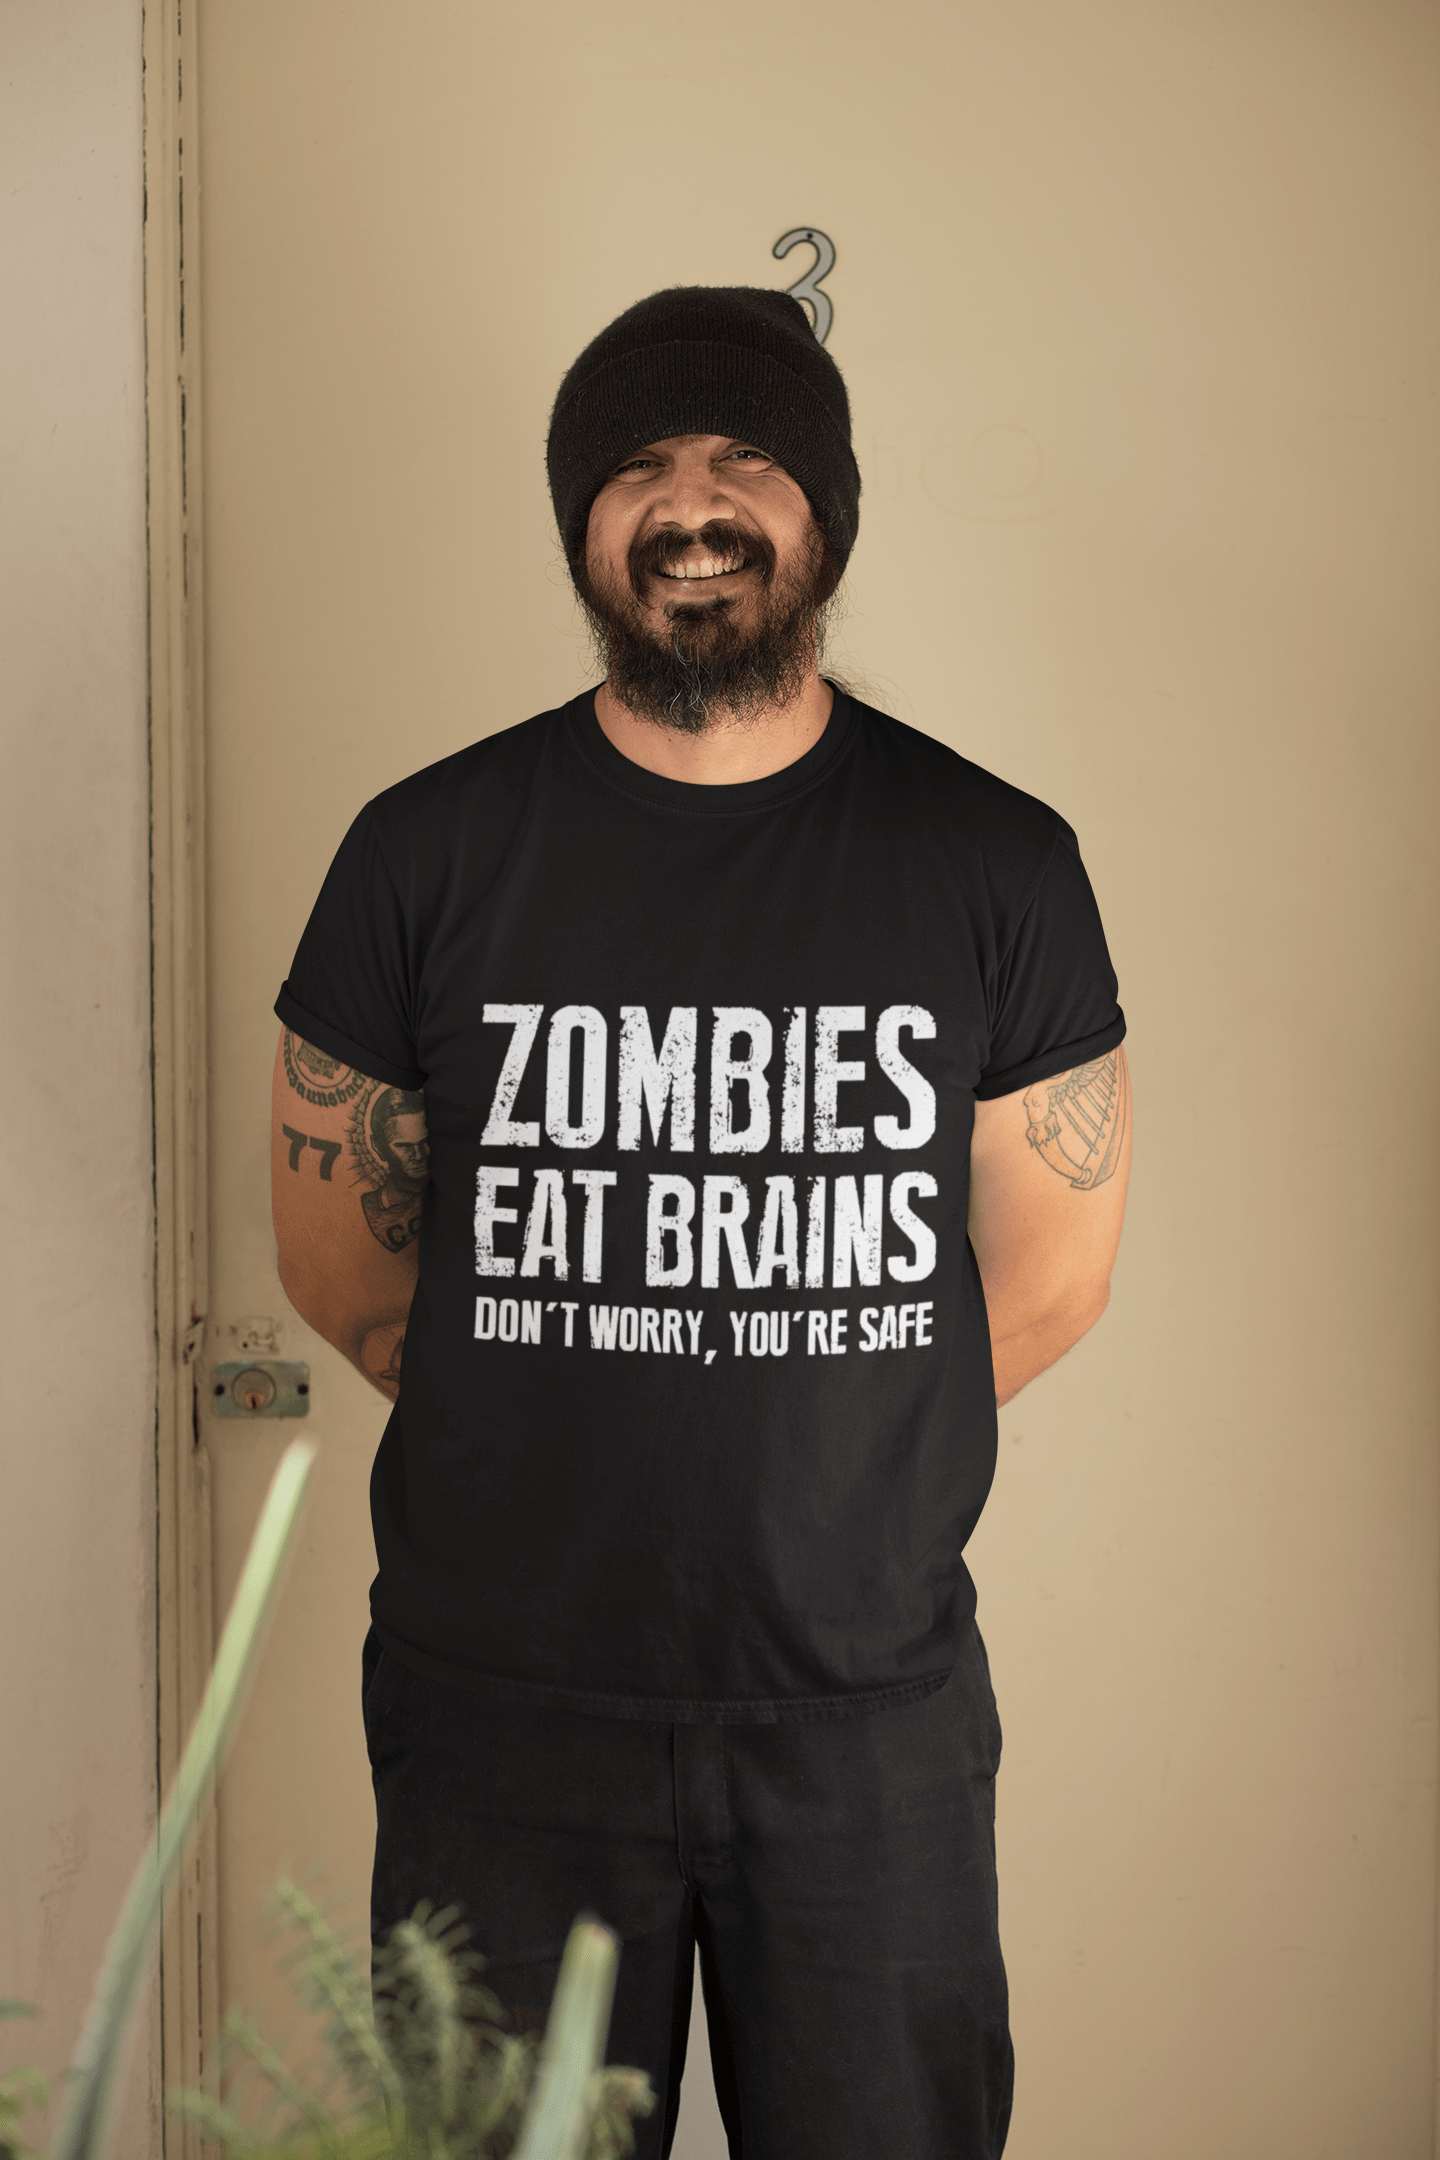 Men's Graphic T-Shirt Zombies Eat Brains, Don't Worry You're Safe Deep Black Round neck